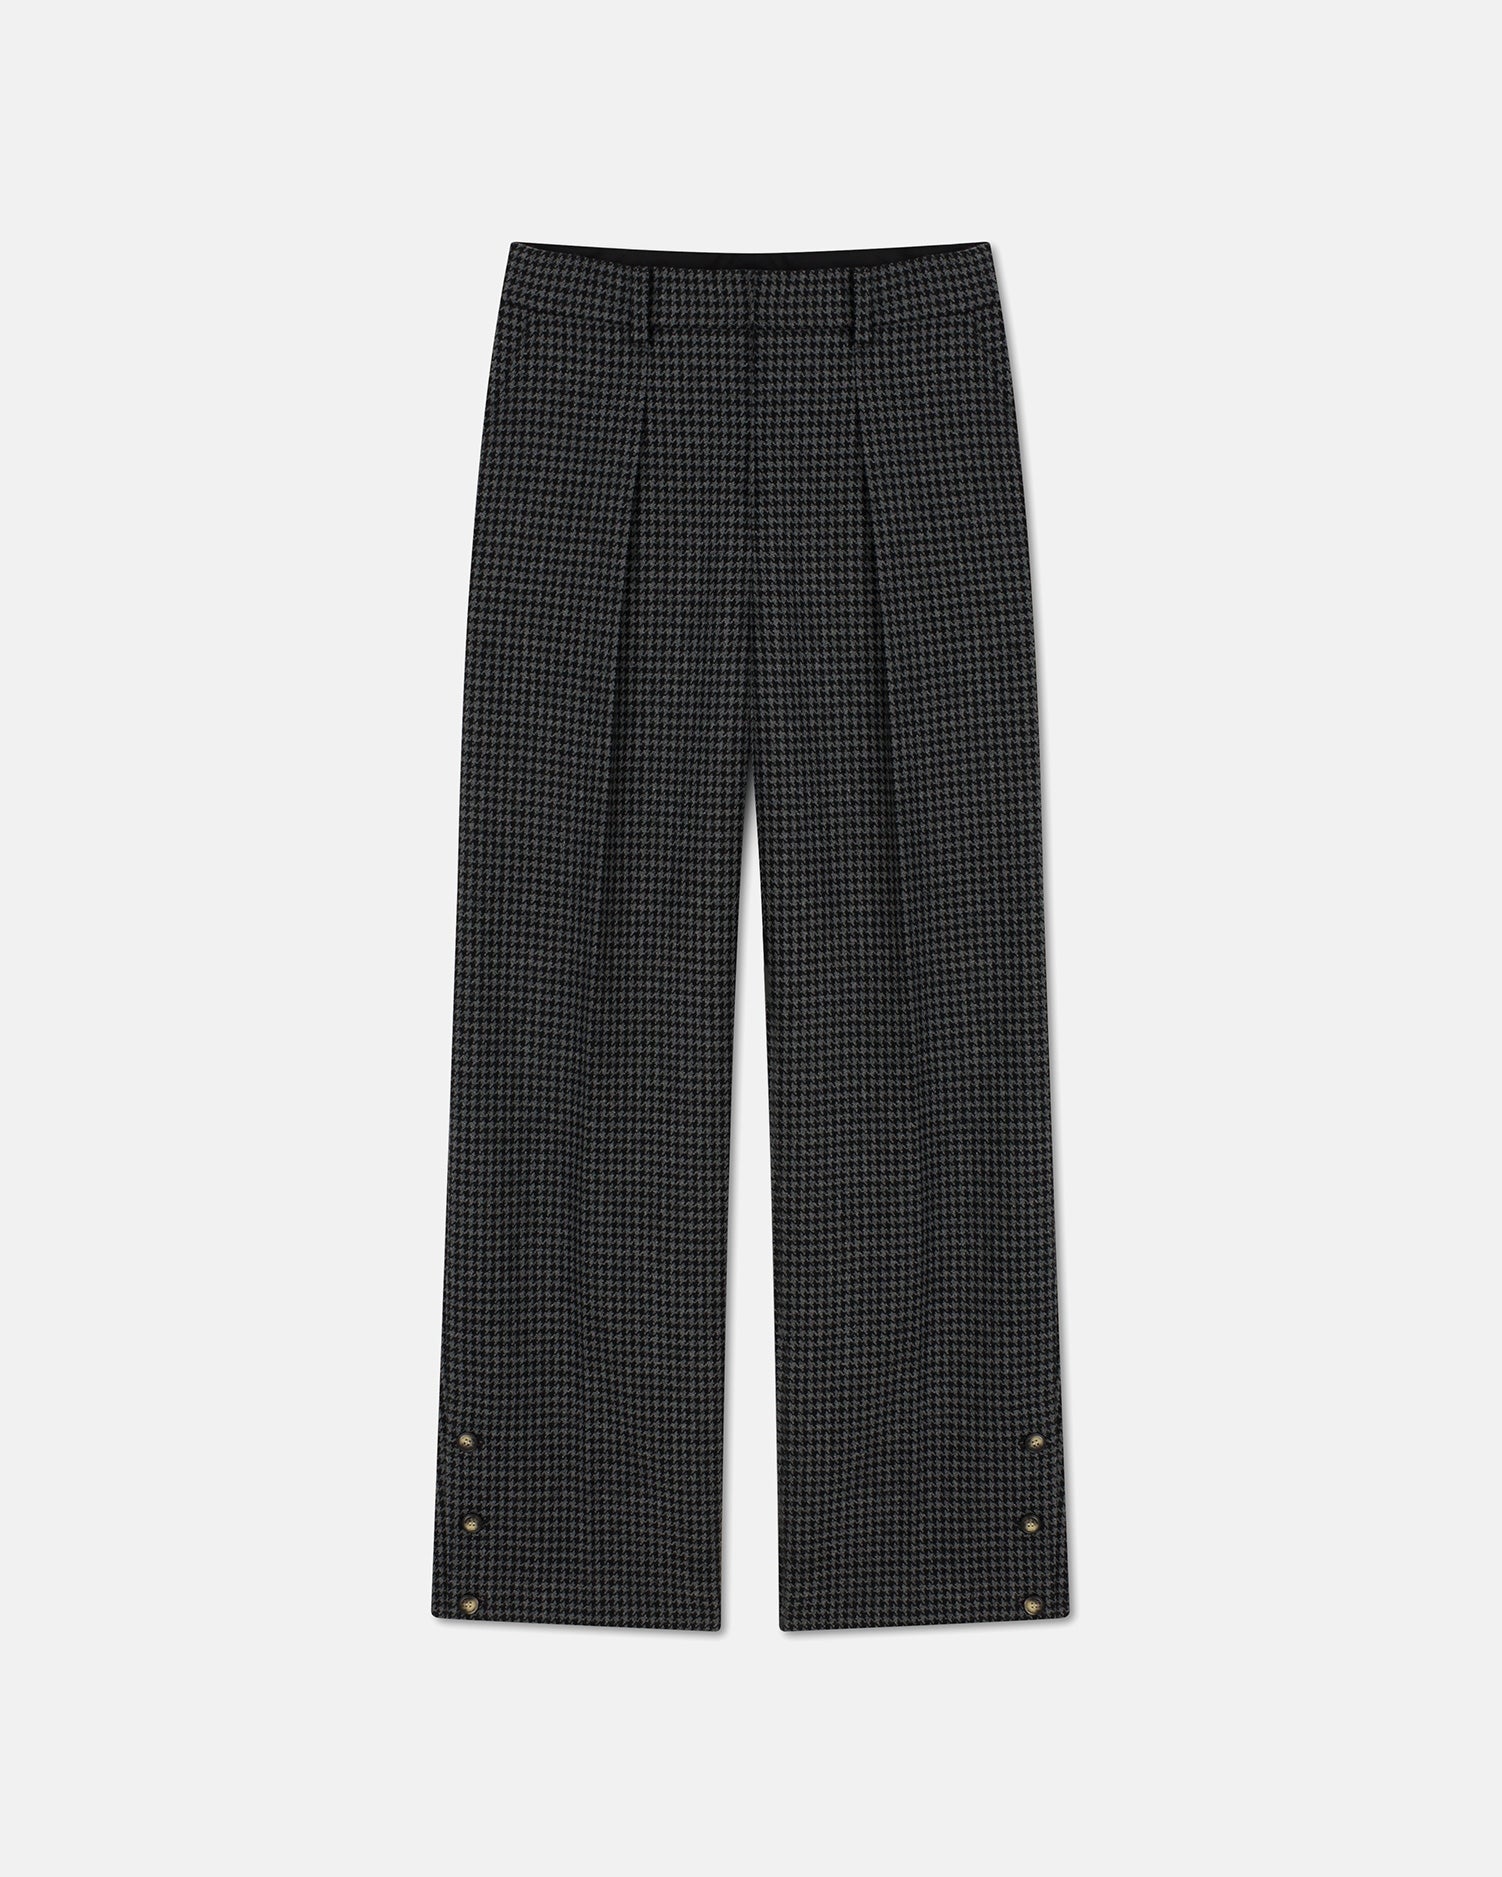 Wilco Cropped - Houndstooth Wool Cropped Pants - Grey Black Houndstoot ...